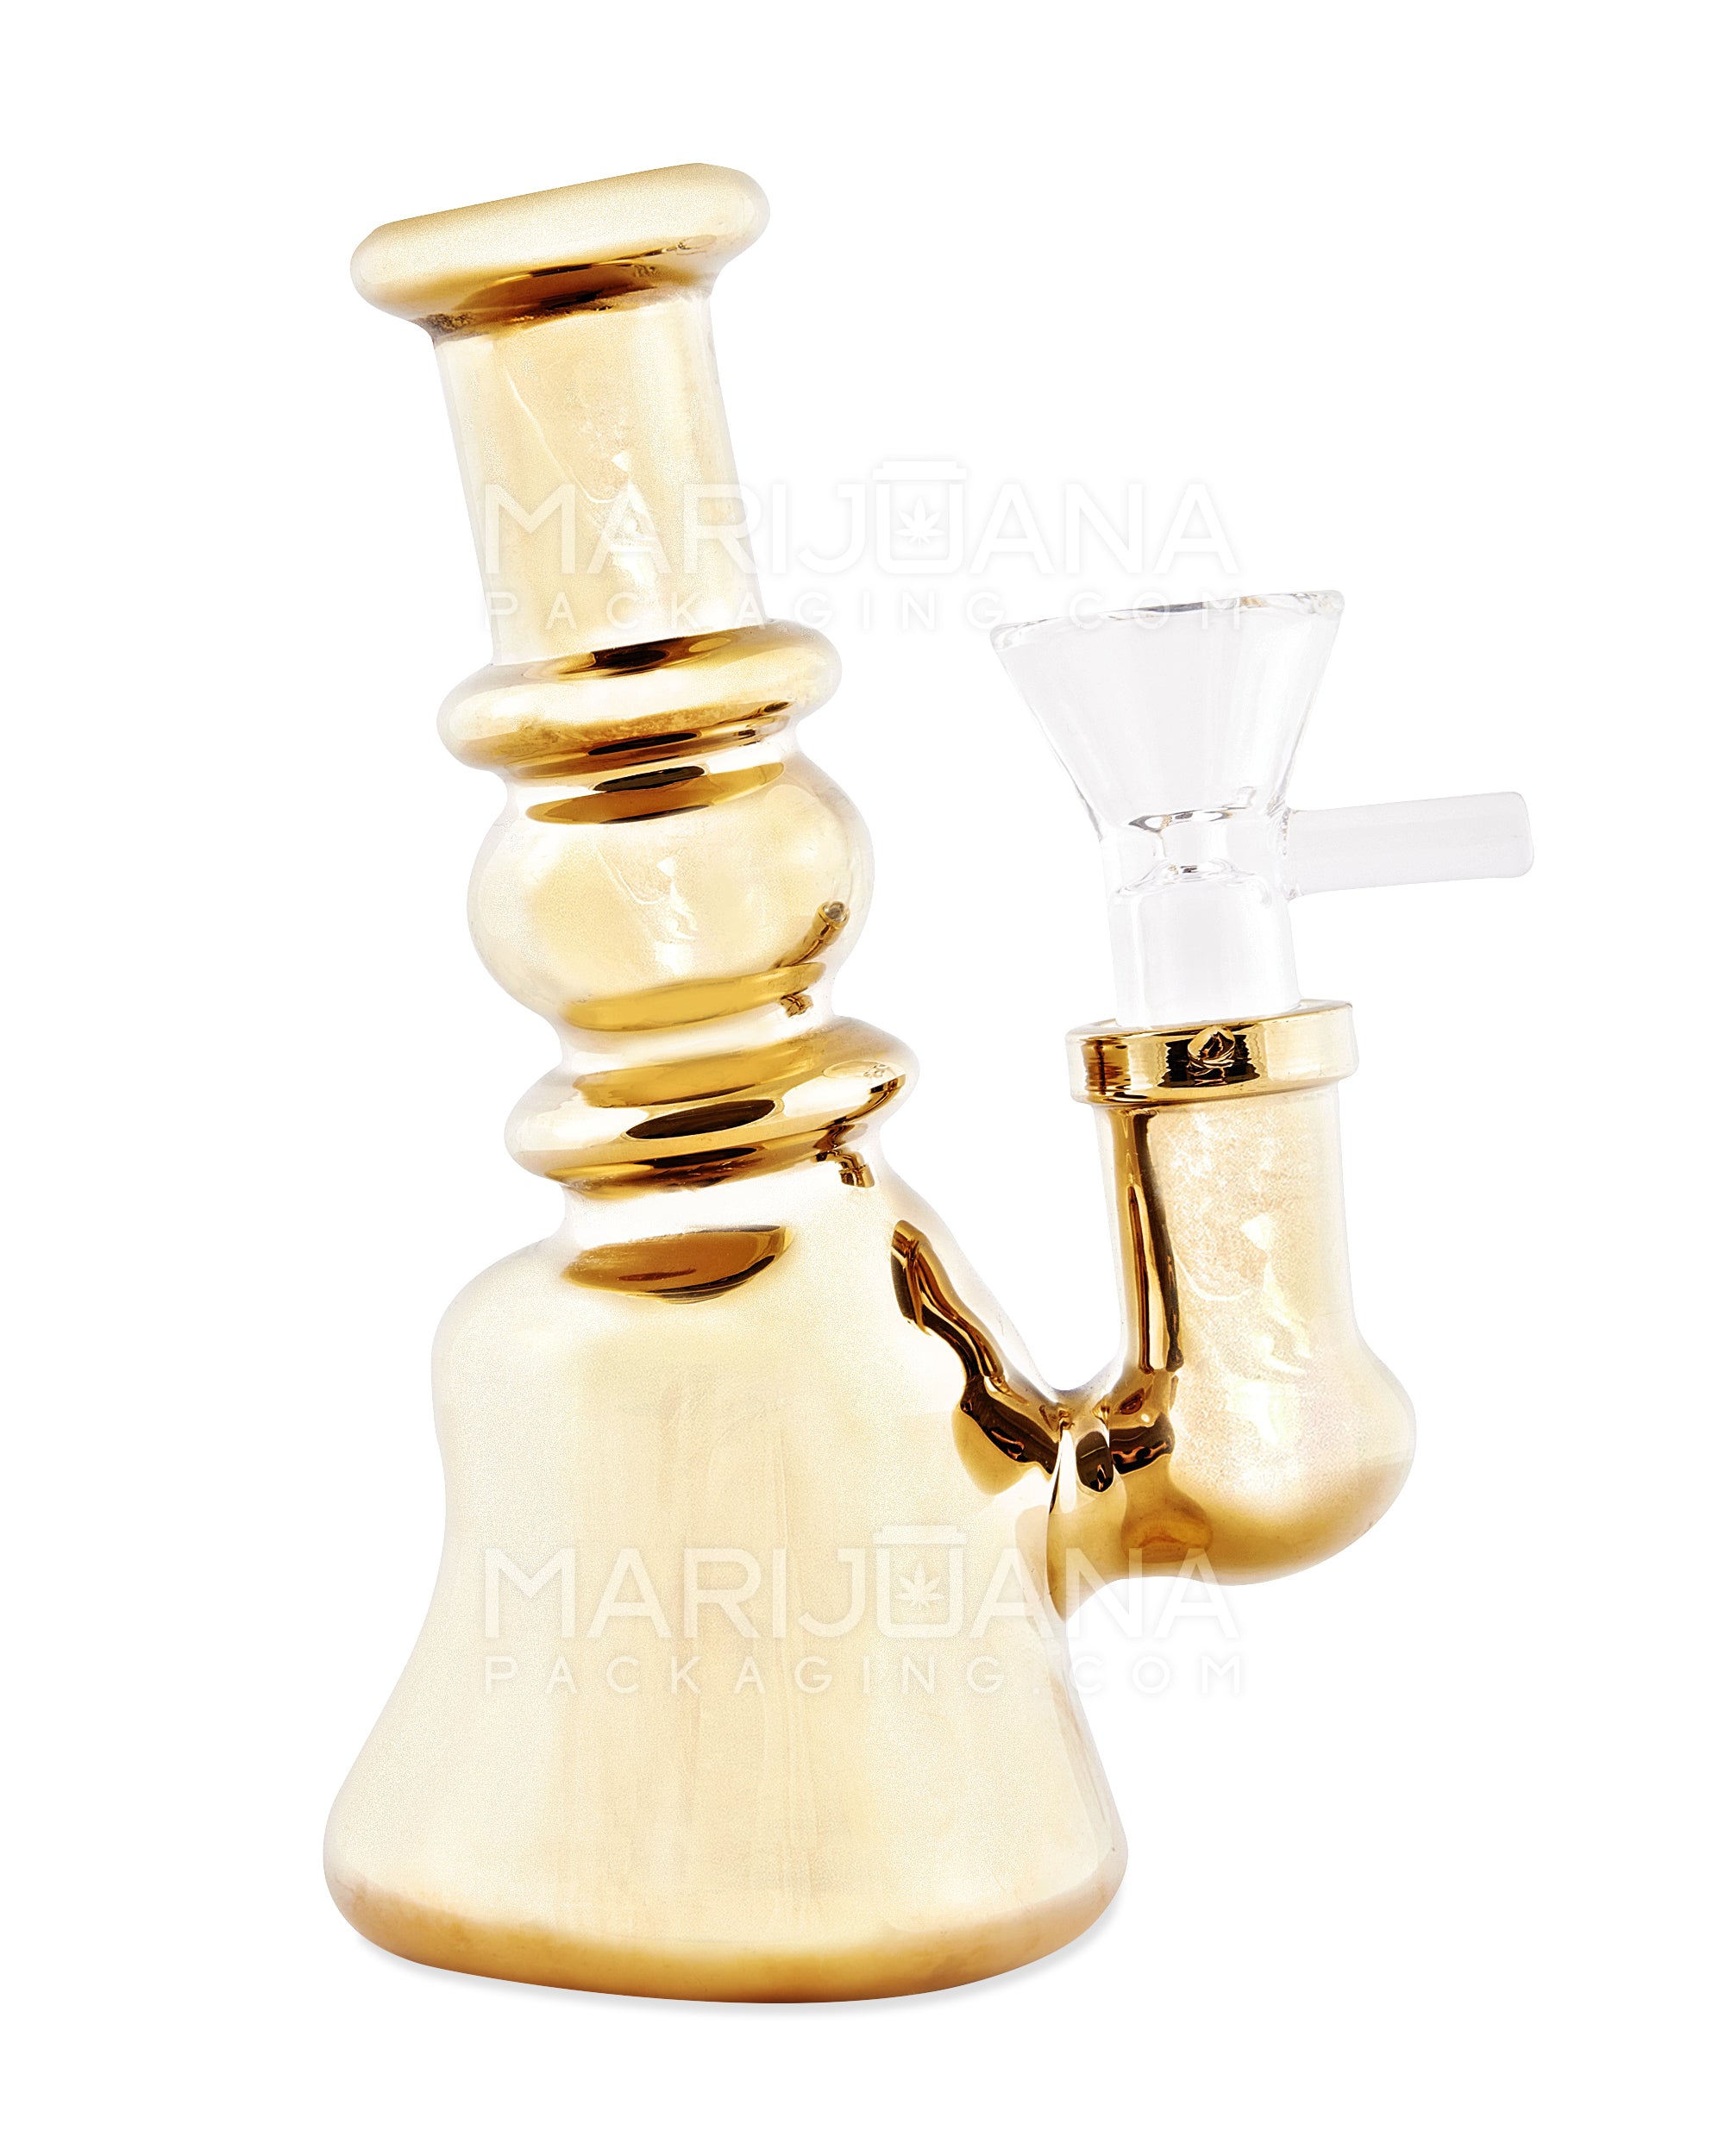 Electroplated Mini Beaker Water Pipe | 4.75in Tall - 14mm Bowl - Gold